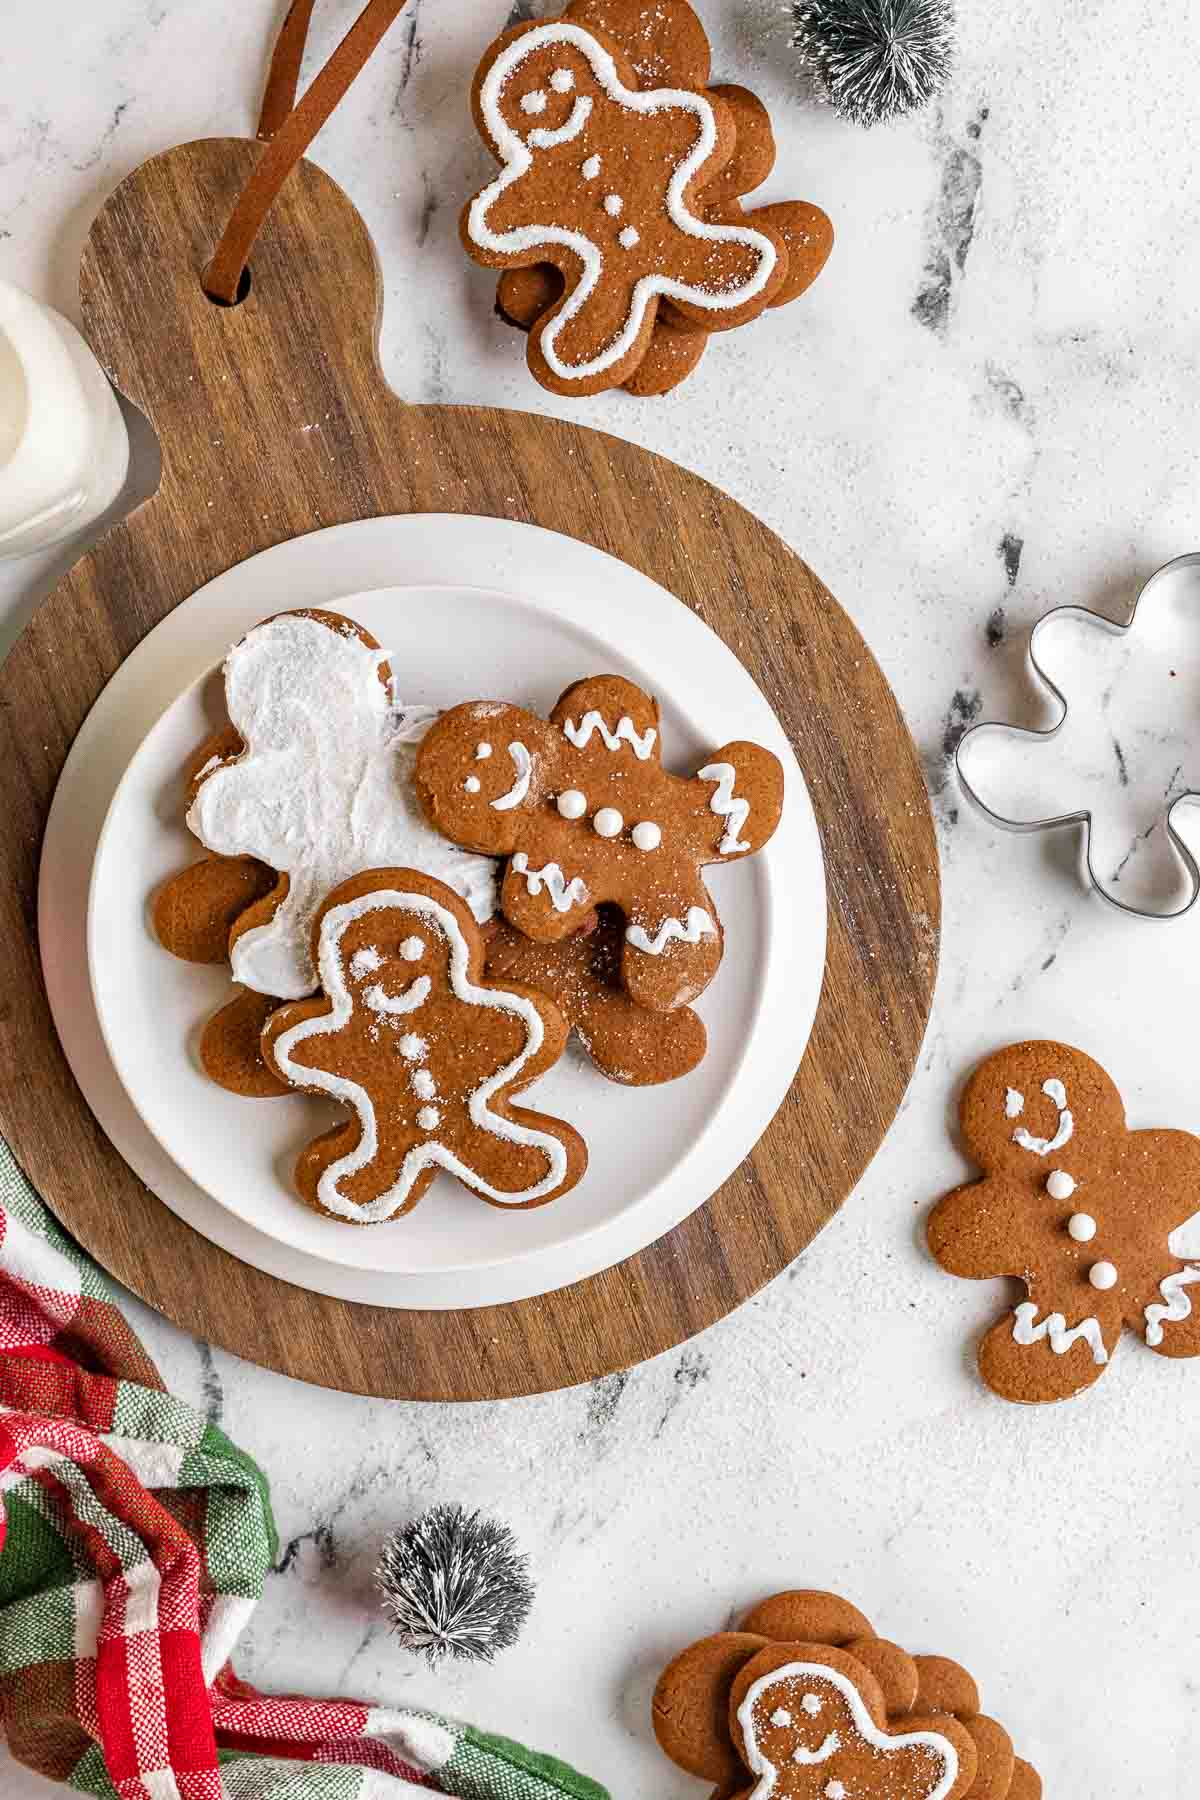 Chocolate Gingerbread Men on serving plate